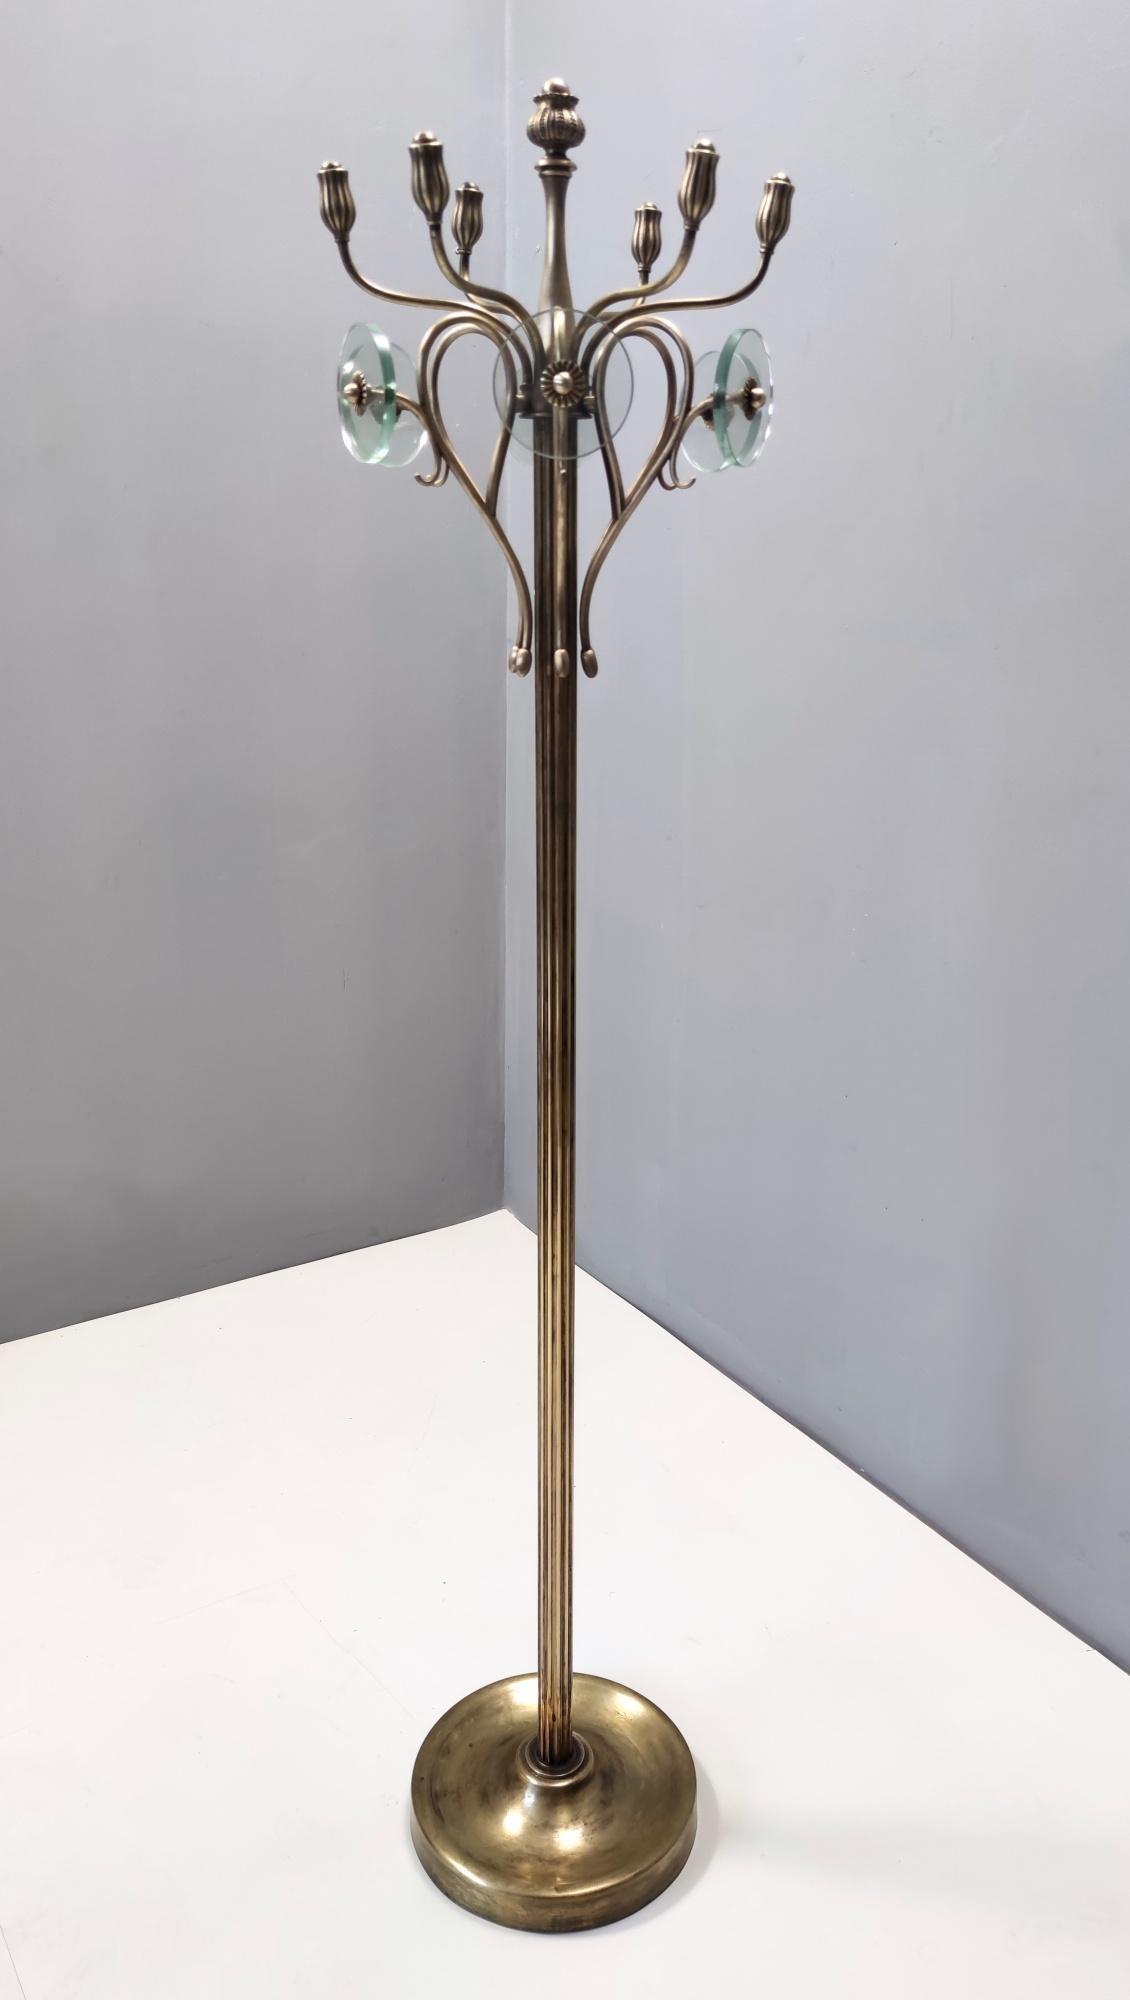 Revolving Brass and Glass Coat Rack Ascribable to Fontana Arte, Italy In Good Condition For Sale In Bresso, Lombardy